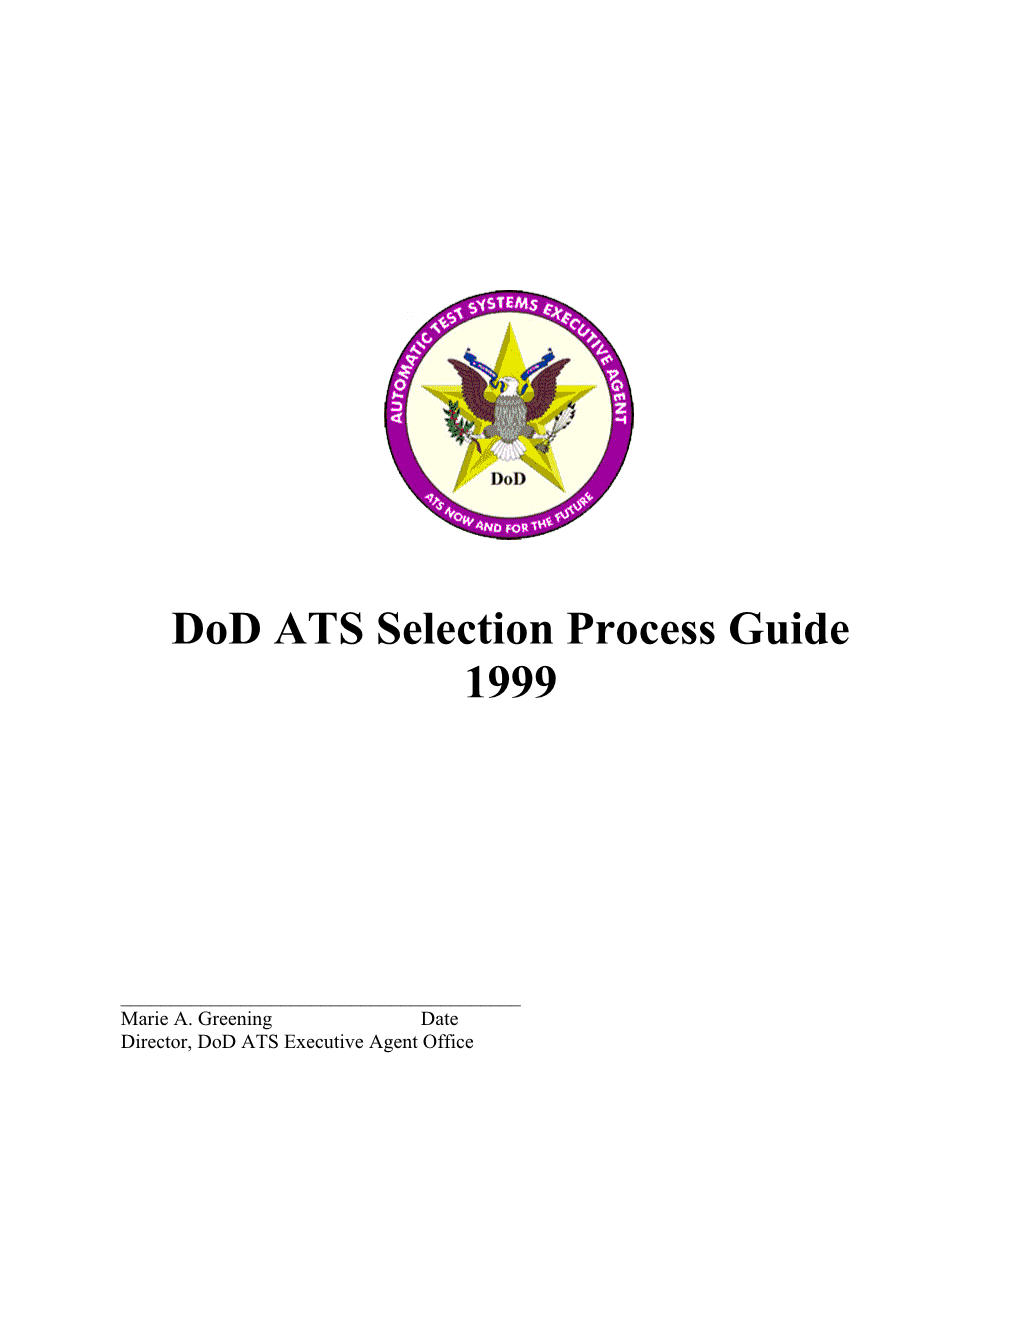 Dod ATS (Automatic Test Systems) Selection Process Guide